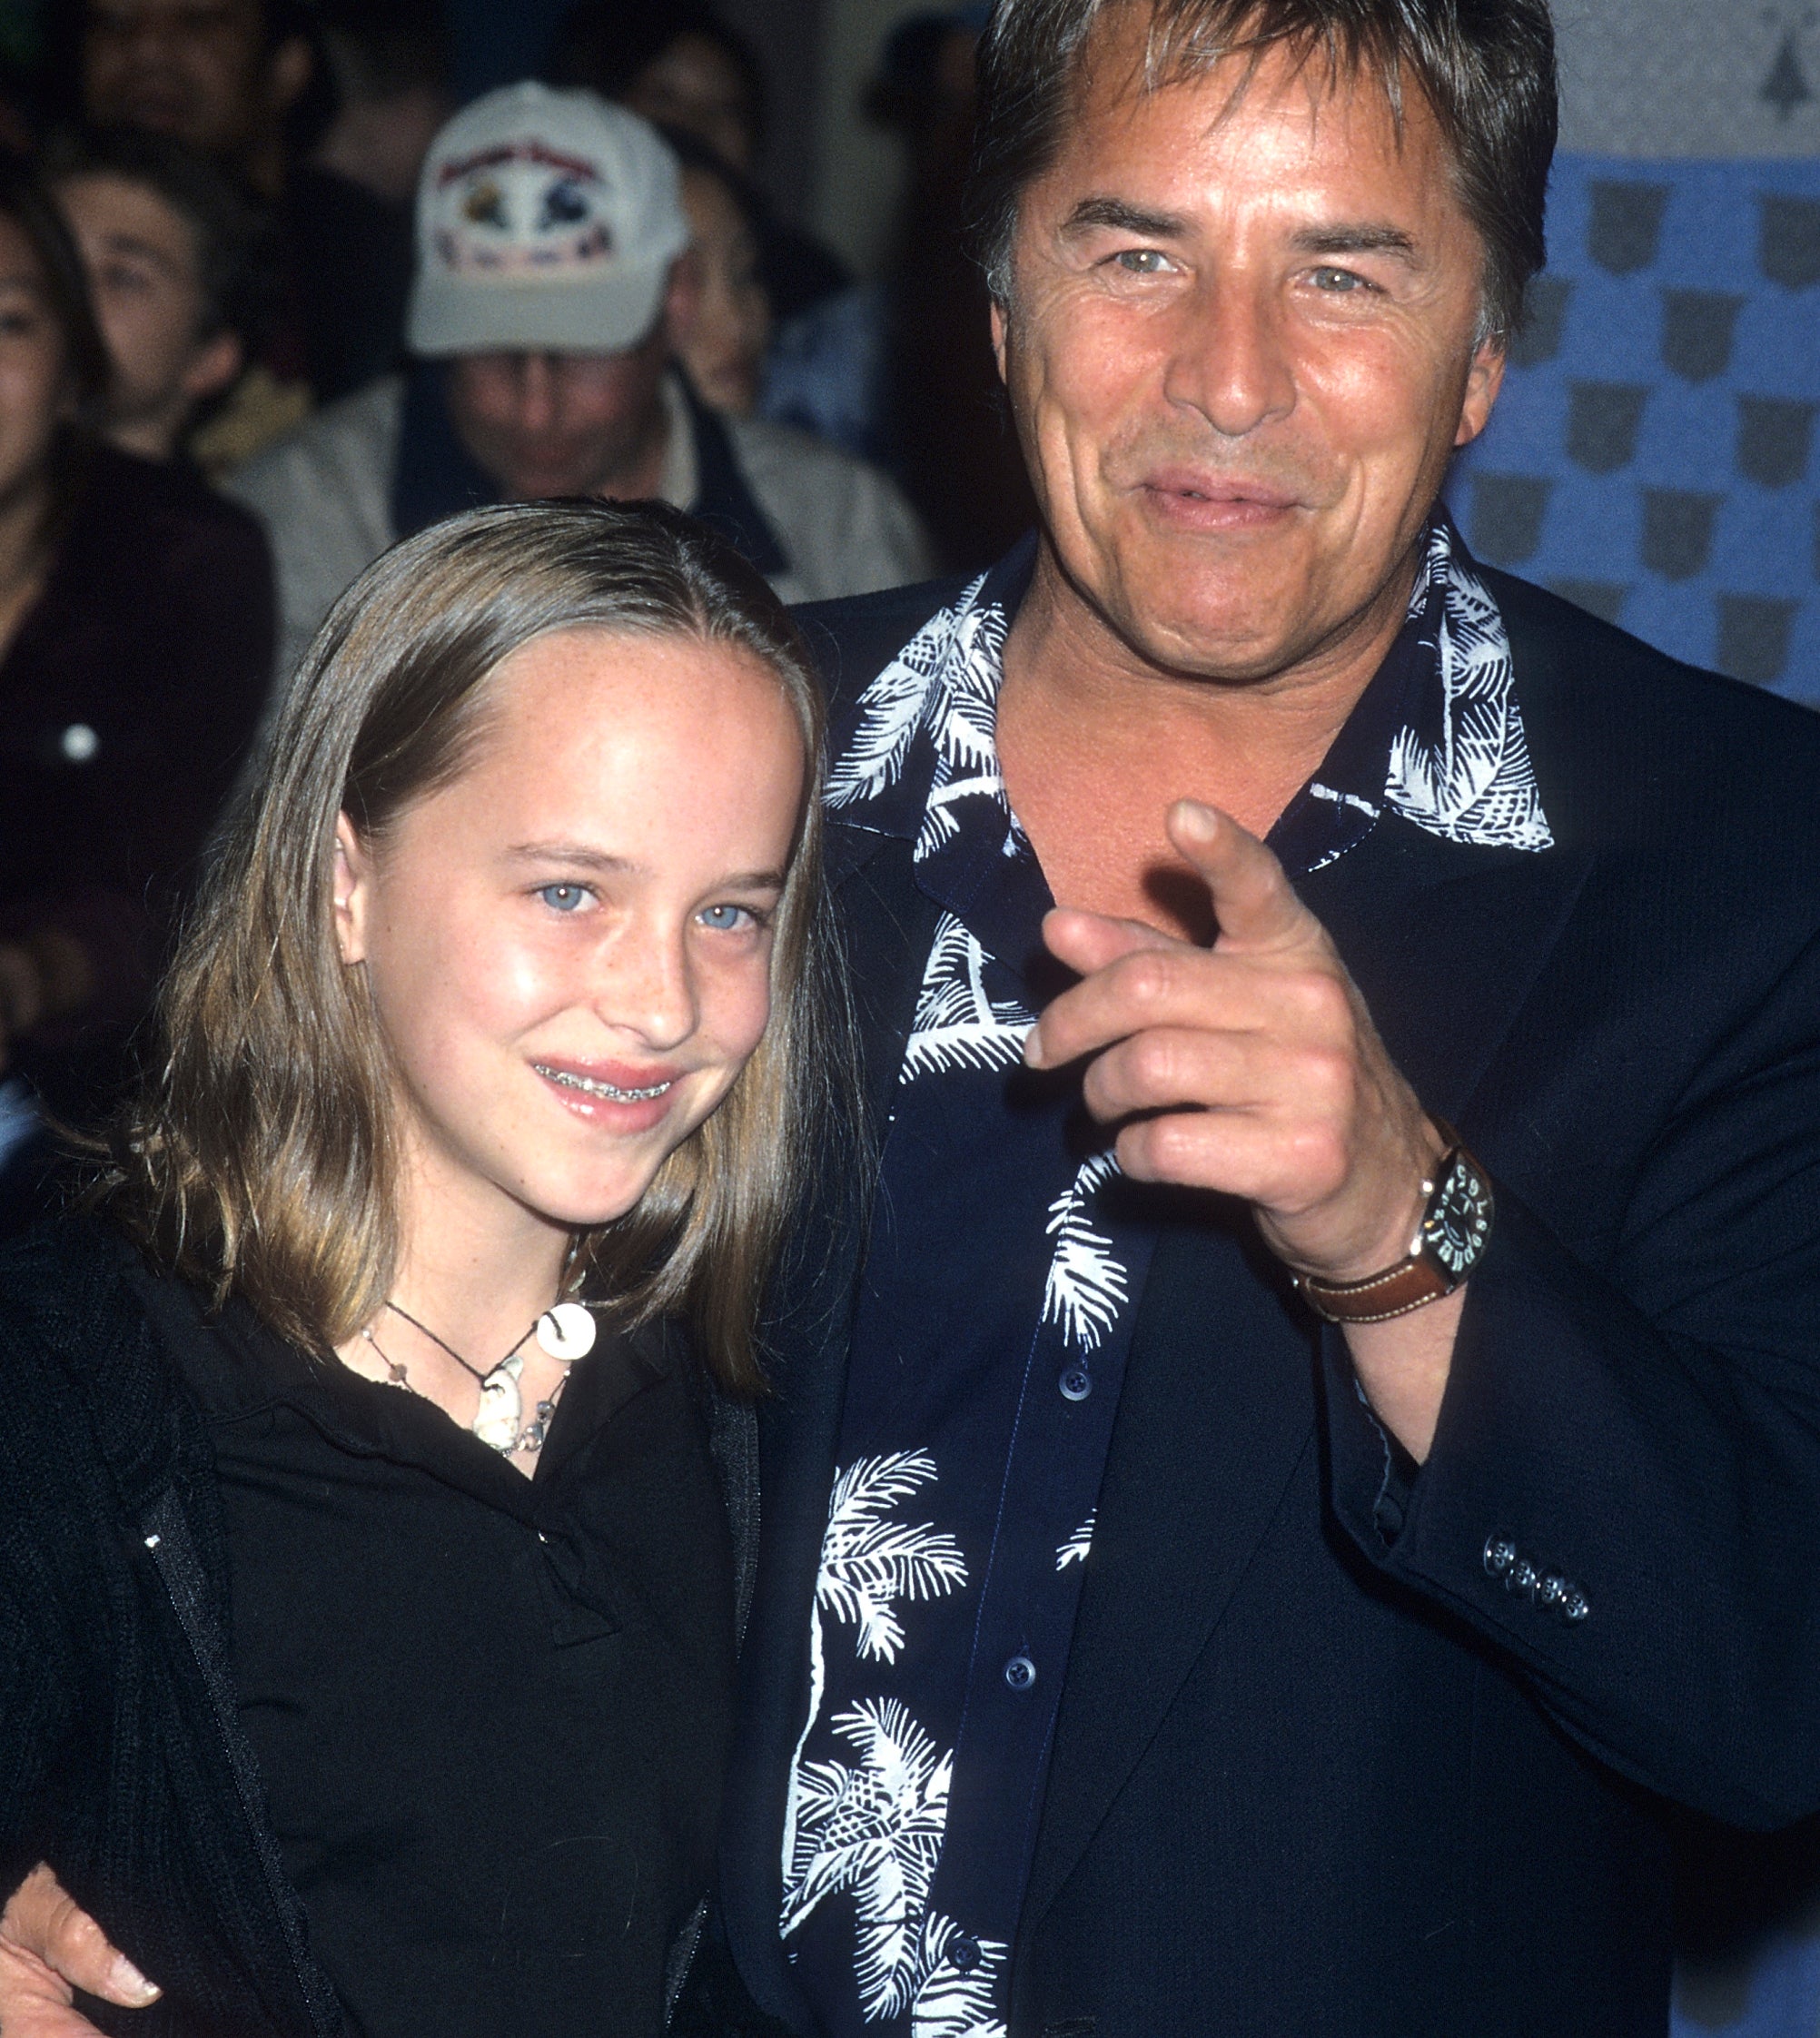 Close-up of Dakota as a child with Don Johnson at a media event